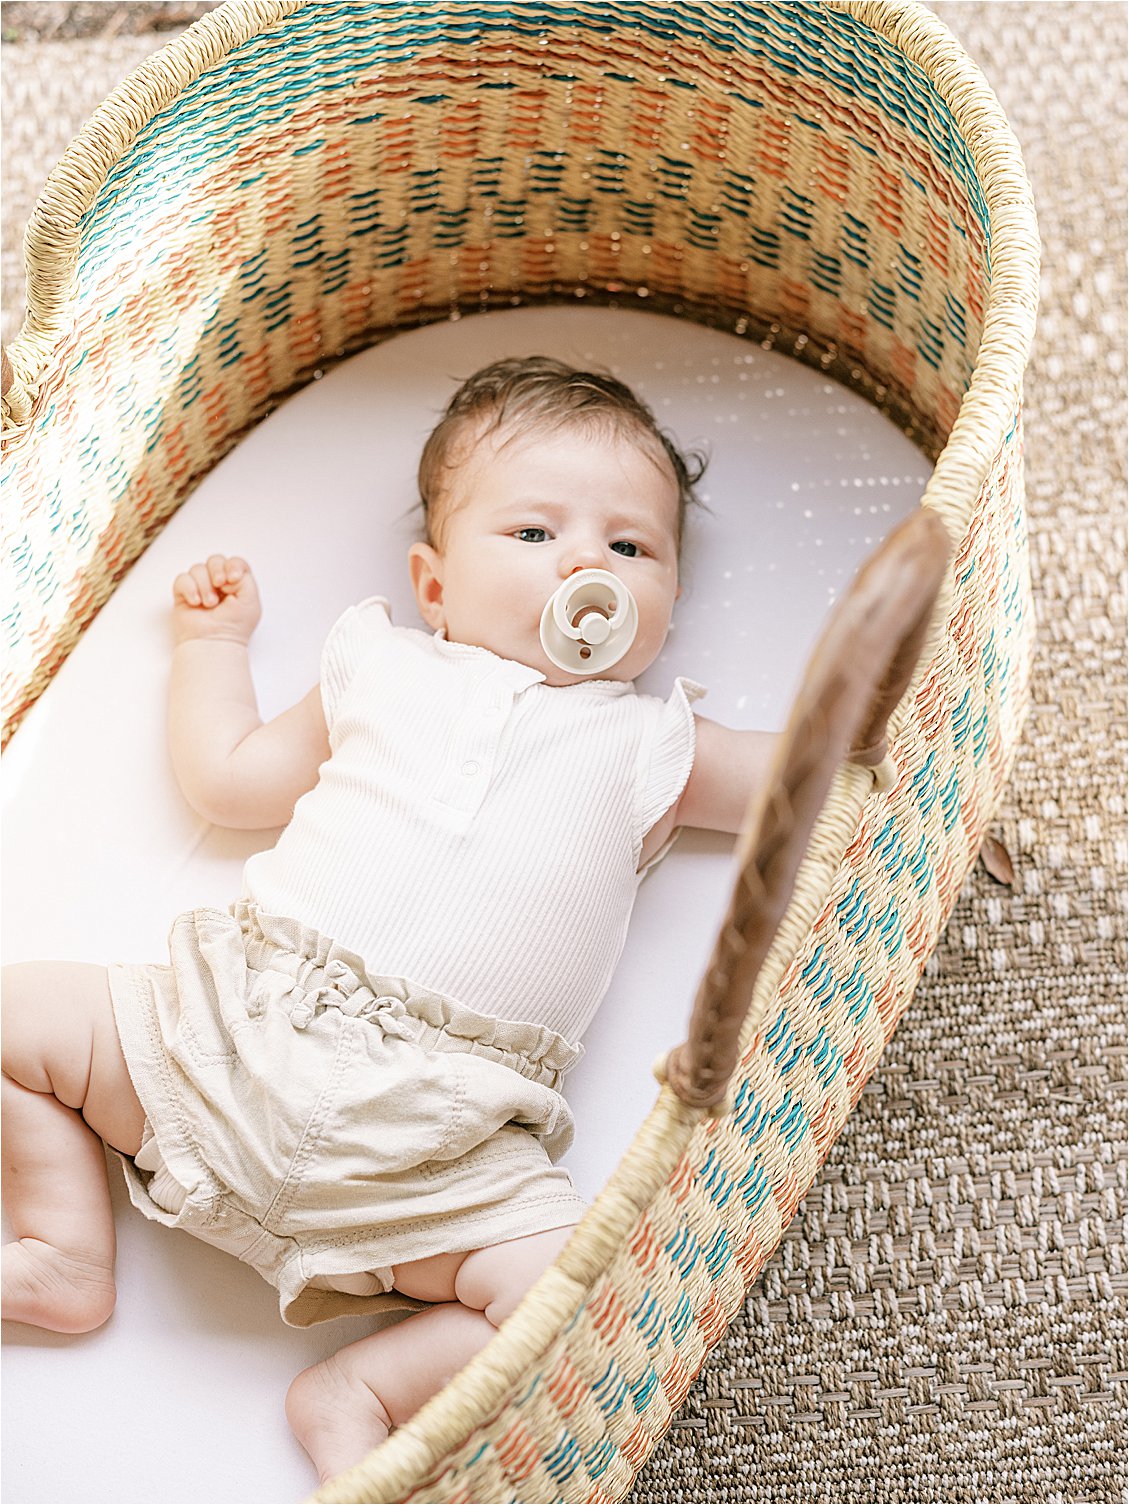 Moses Basket Family Session in Venice Florida with Florida Film Family Photographer, Renee Hollingshead